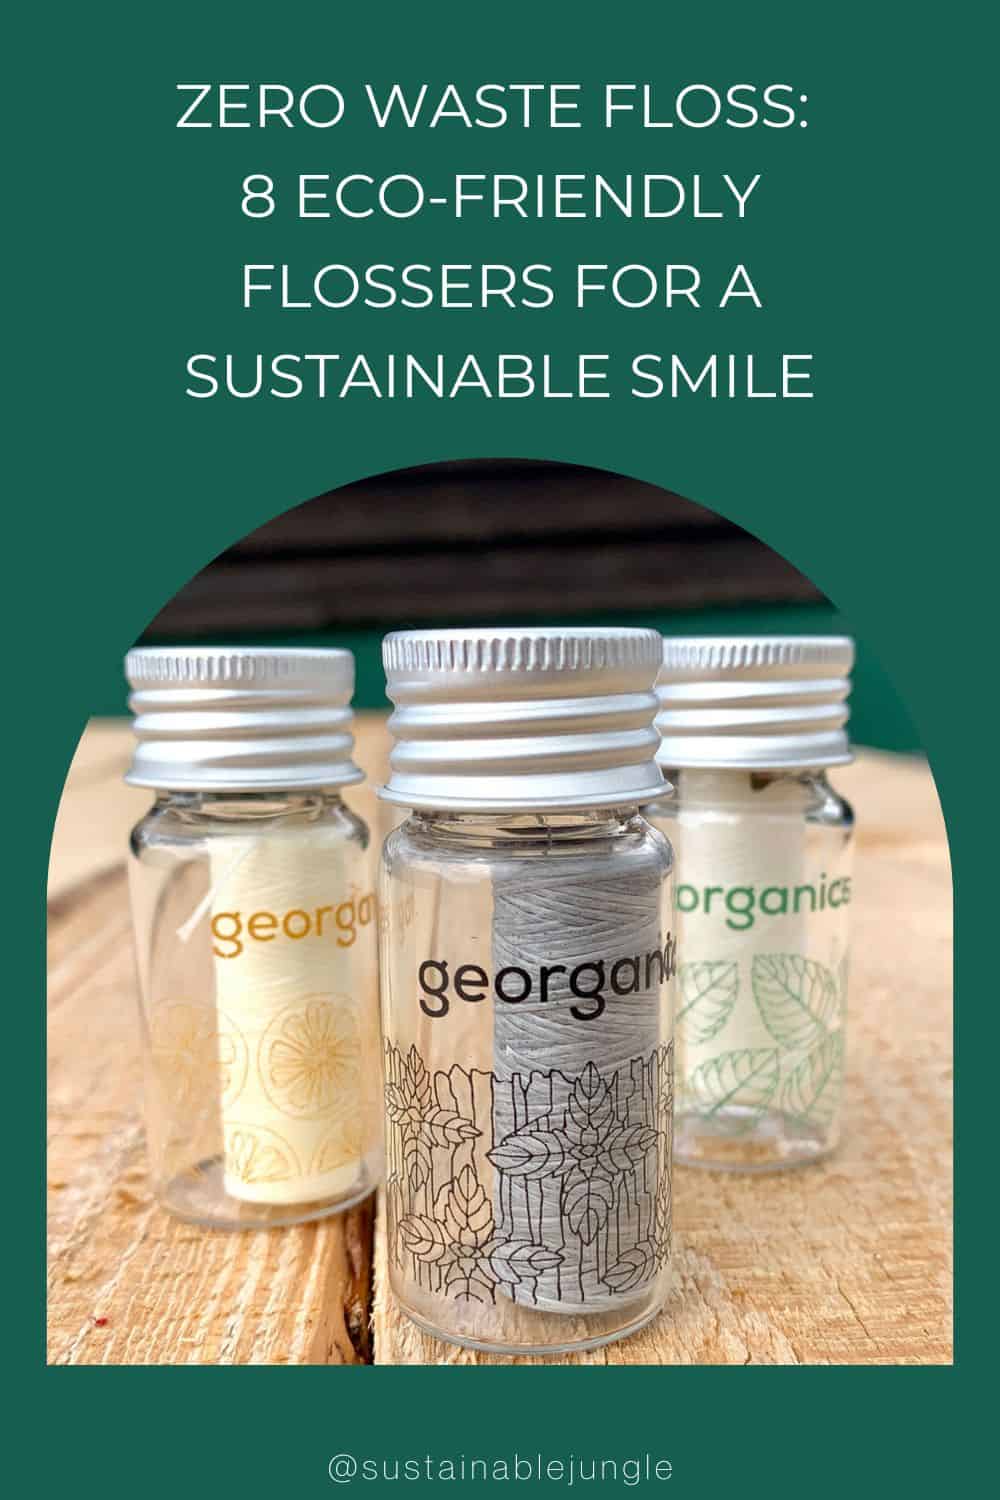 Zero Waste Floss: 8 Eco-Friendly Flossers For A Sustainable Smile Image by Georganics #zerowastefloss #zerowastedentalfloss #ecofriendlyfloss #zerowasteflosspicks #zerowasterefillablesilkfloss #sustainableflossing #sustainablejungle